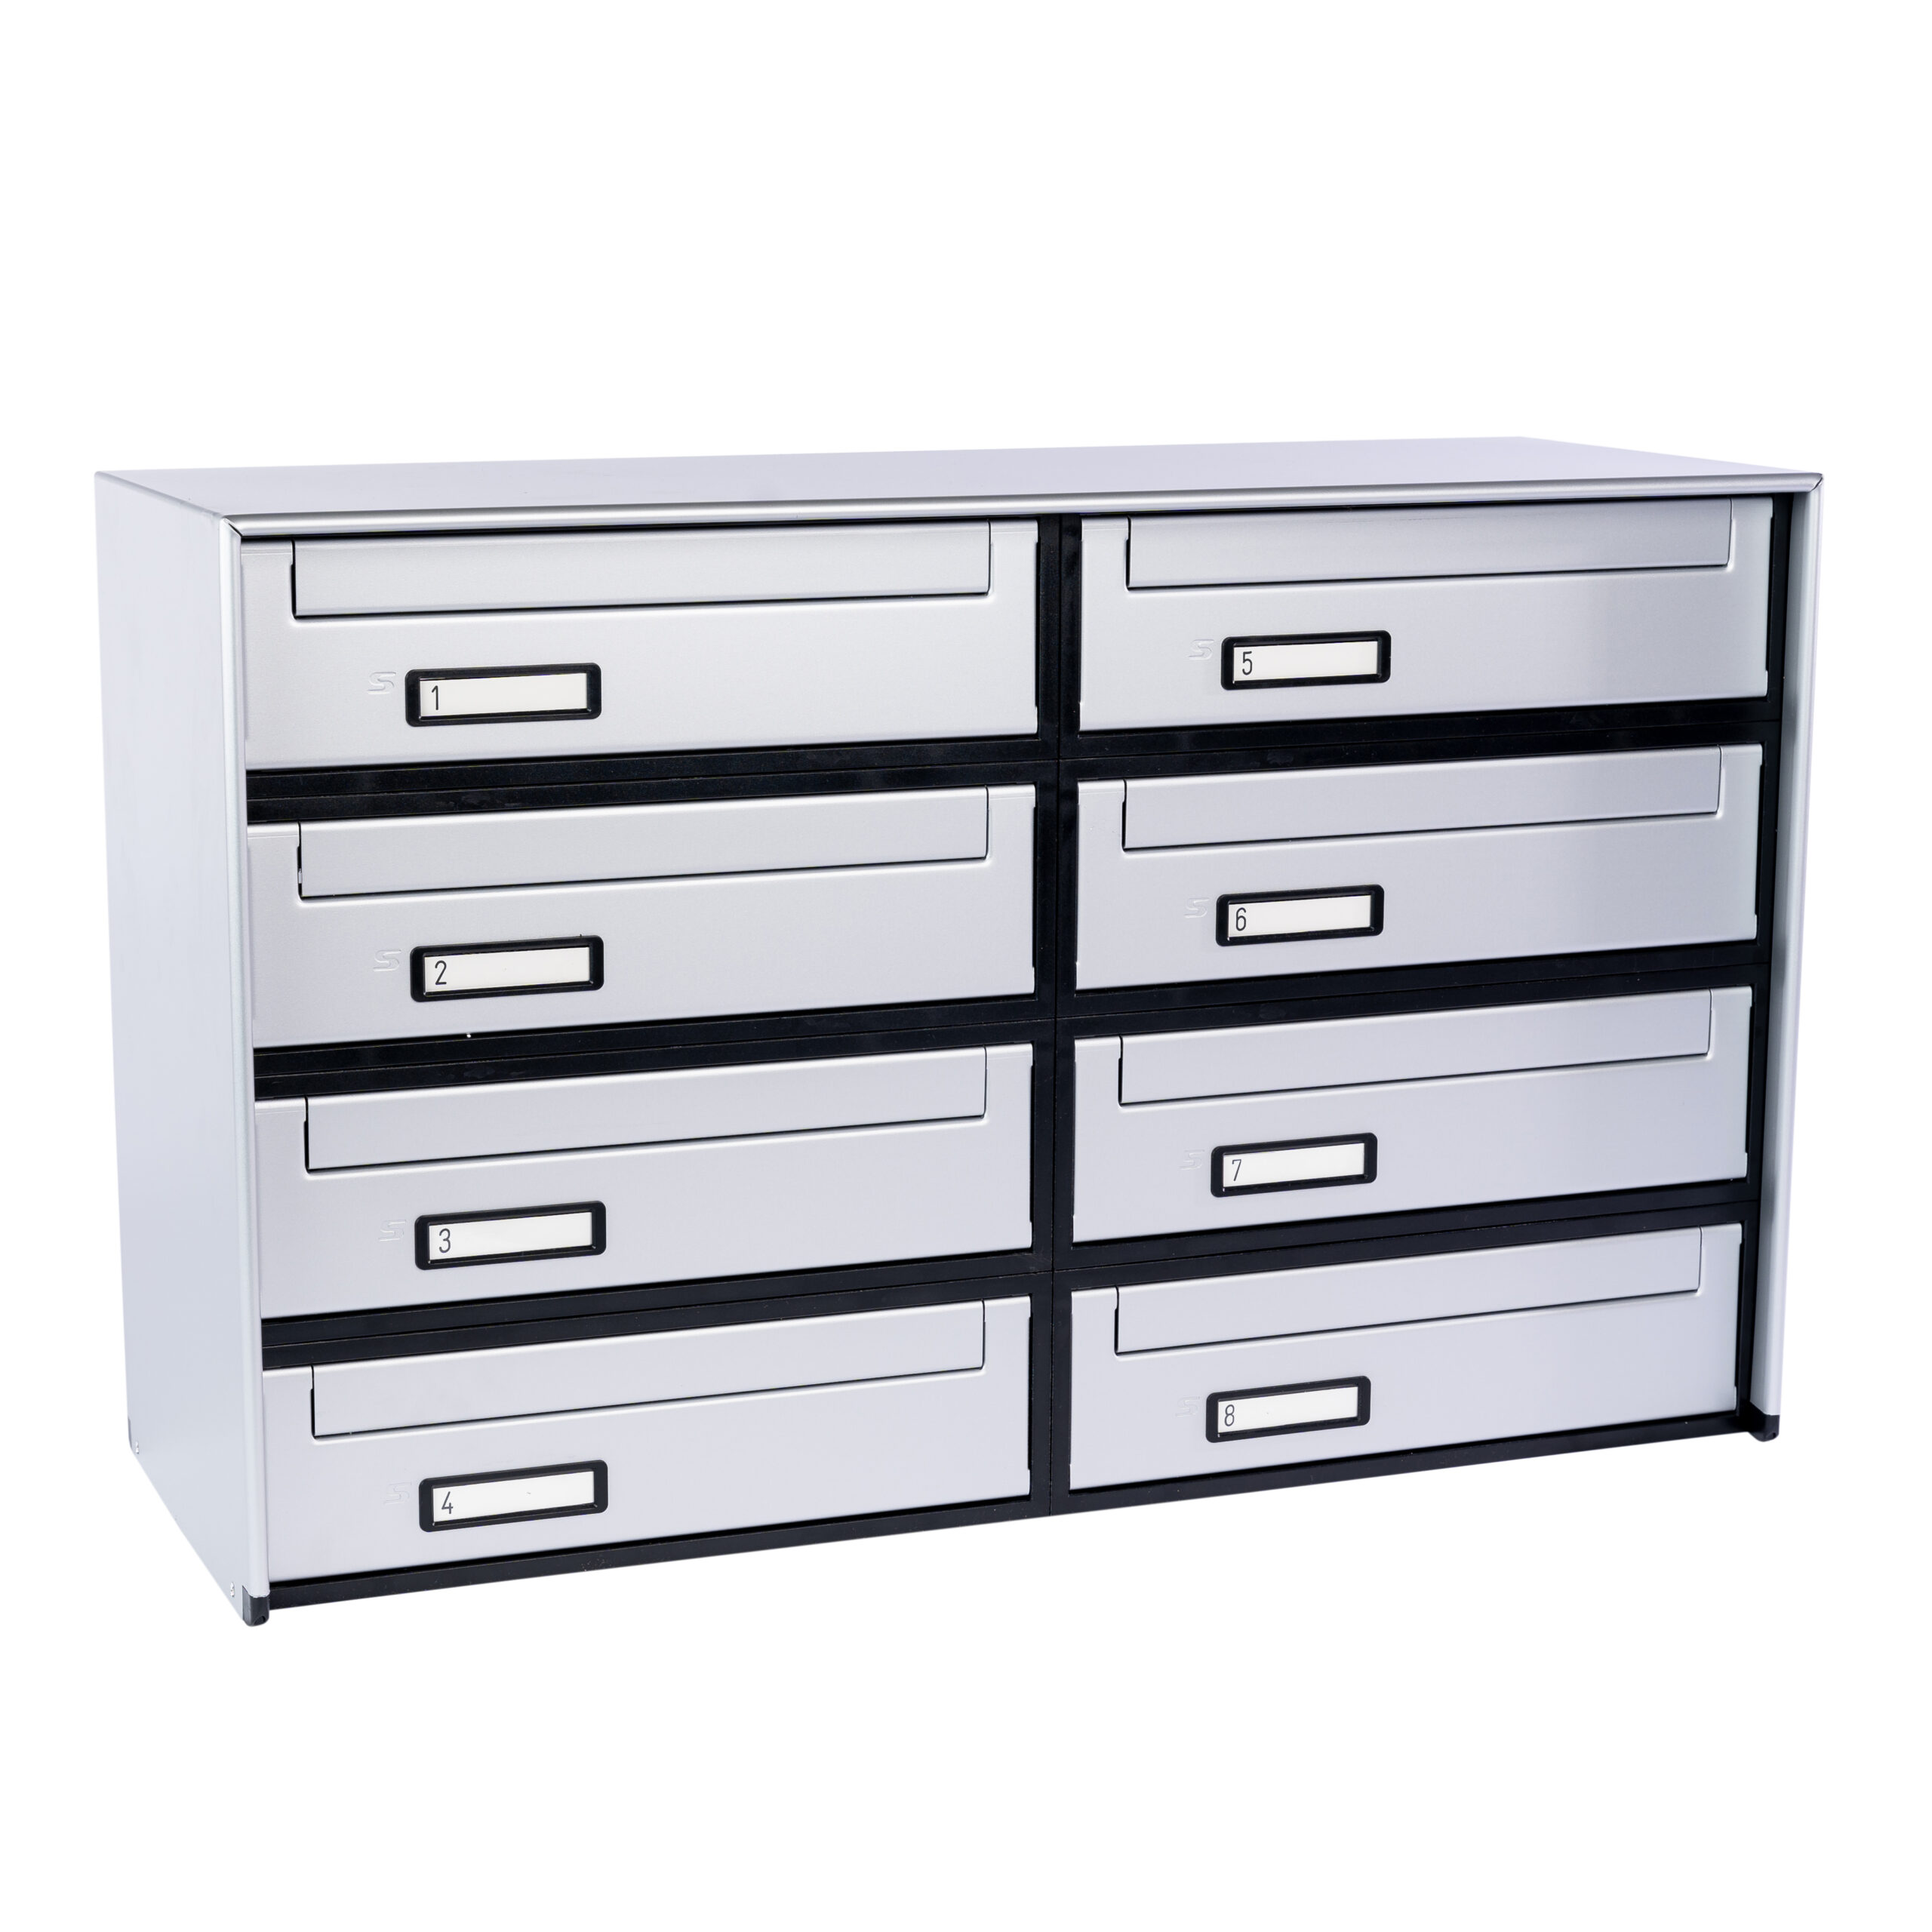 SC6 standard modular letterbox units with rear mail collection – 8 mailboxes